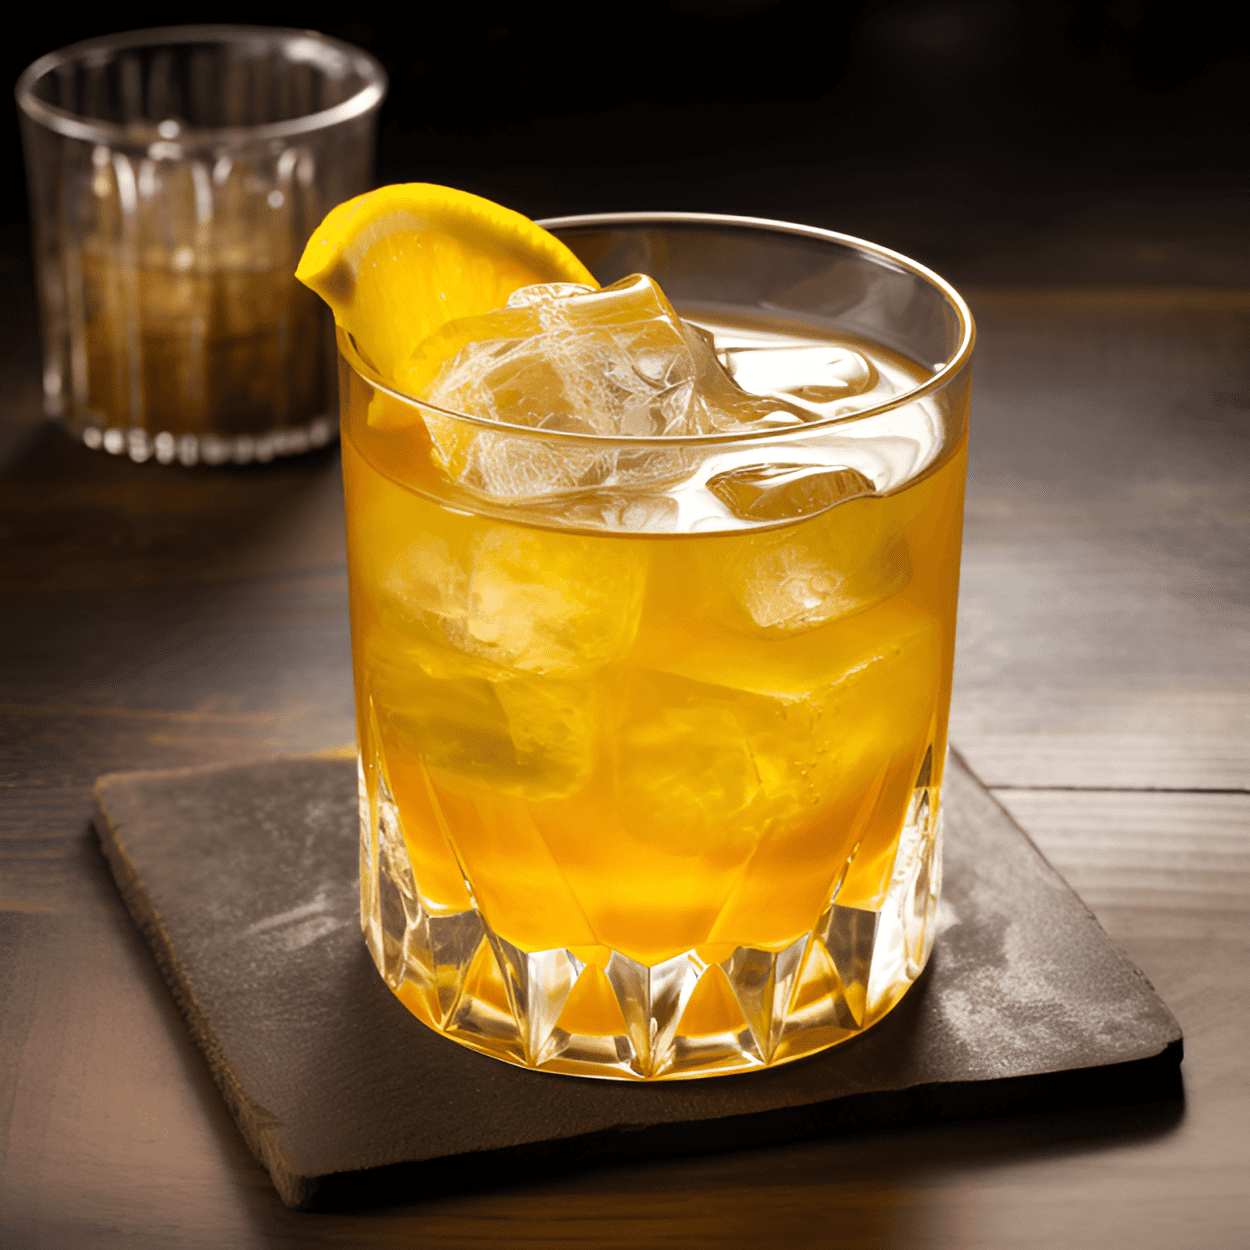 Pulp Fiction Cocktail Recipe - The Pulp Fiction cocktail is a delightful mix of sweet, sour, and bitter flavors. The bourbon provides a strong, robust base, while the lemon juice adds a refreshing sour note. The maple syrup brings a natural sweetness that balances the sourness, and the bitters add a complex layer of flavor.